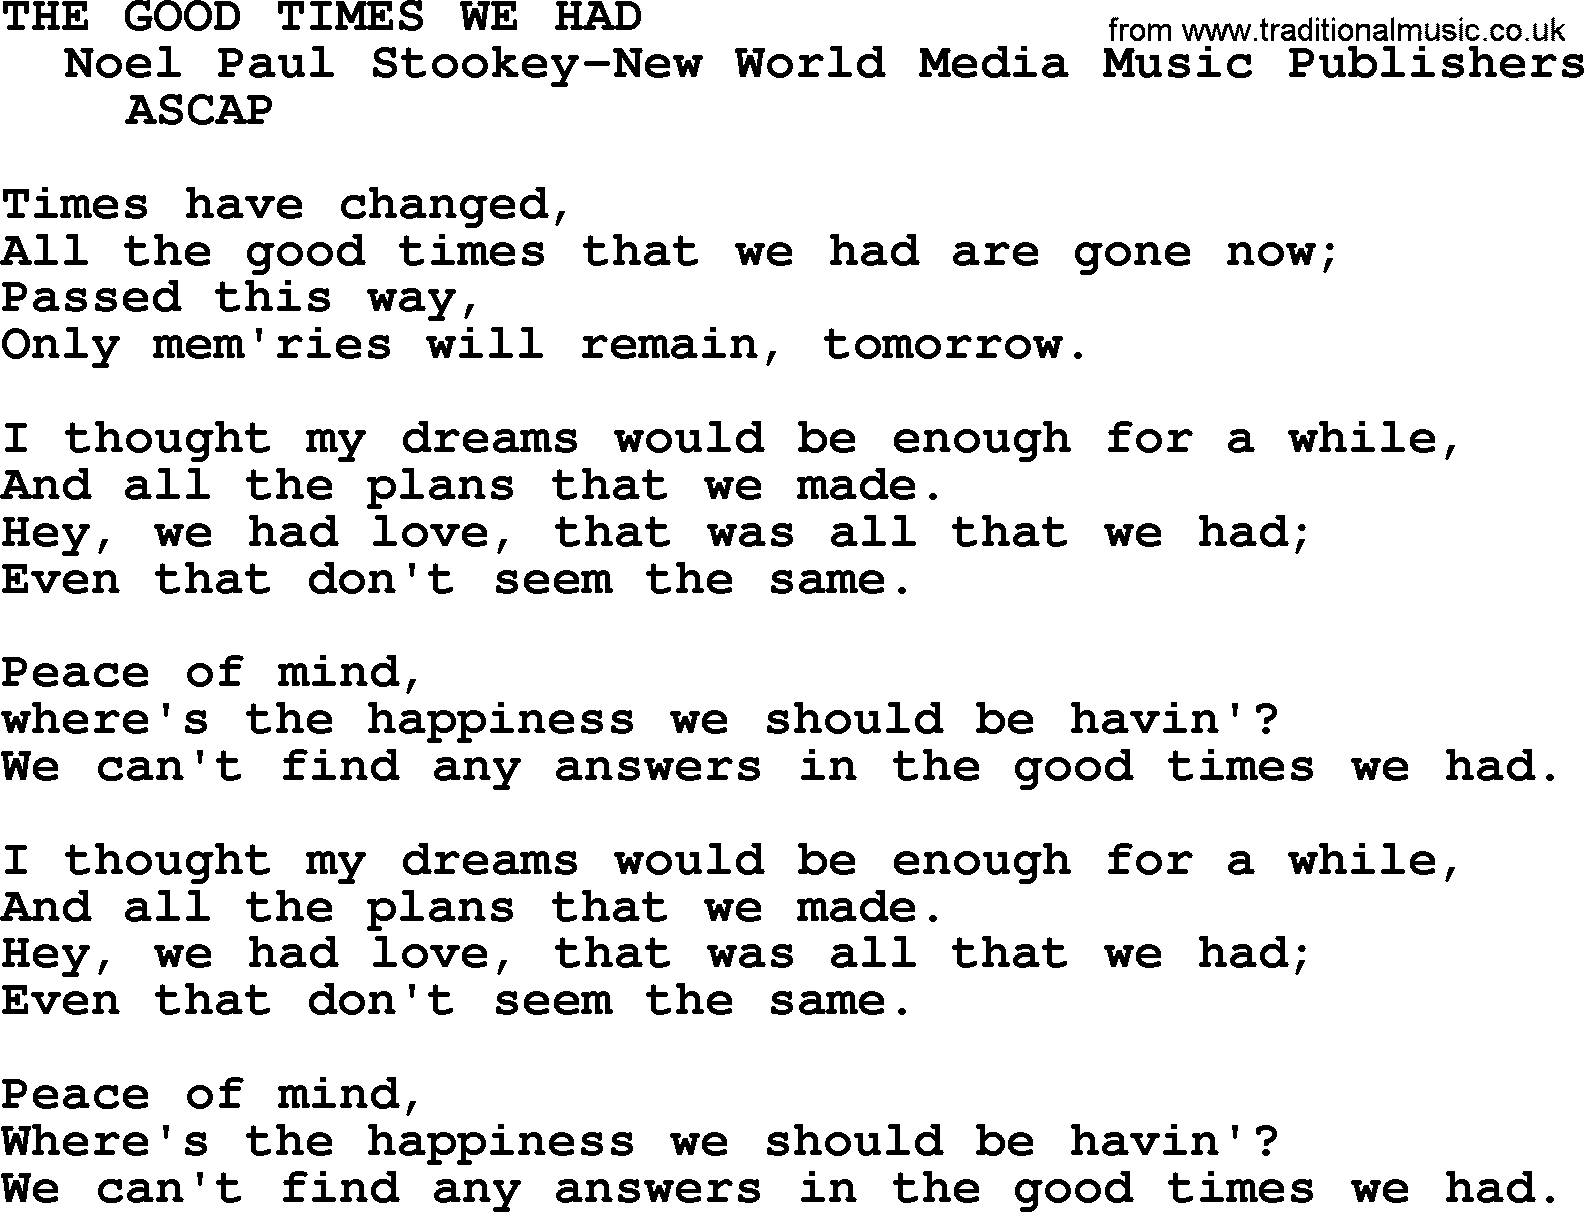 Peter, Paul and Mary song The Good Times We Had lyrics